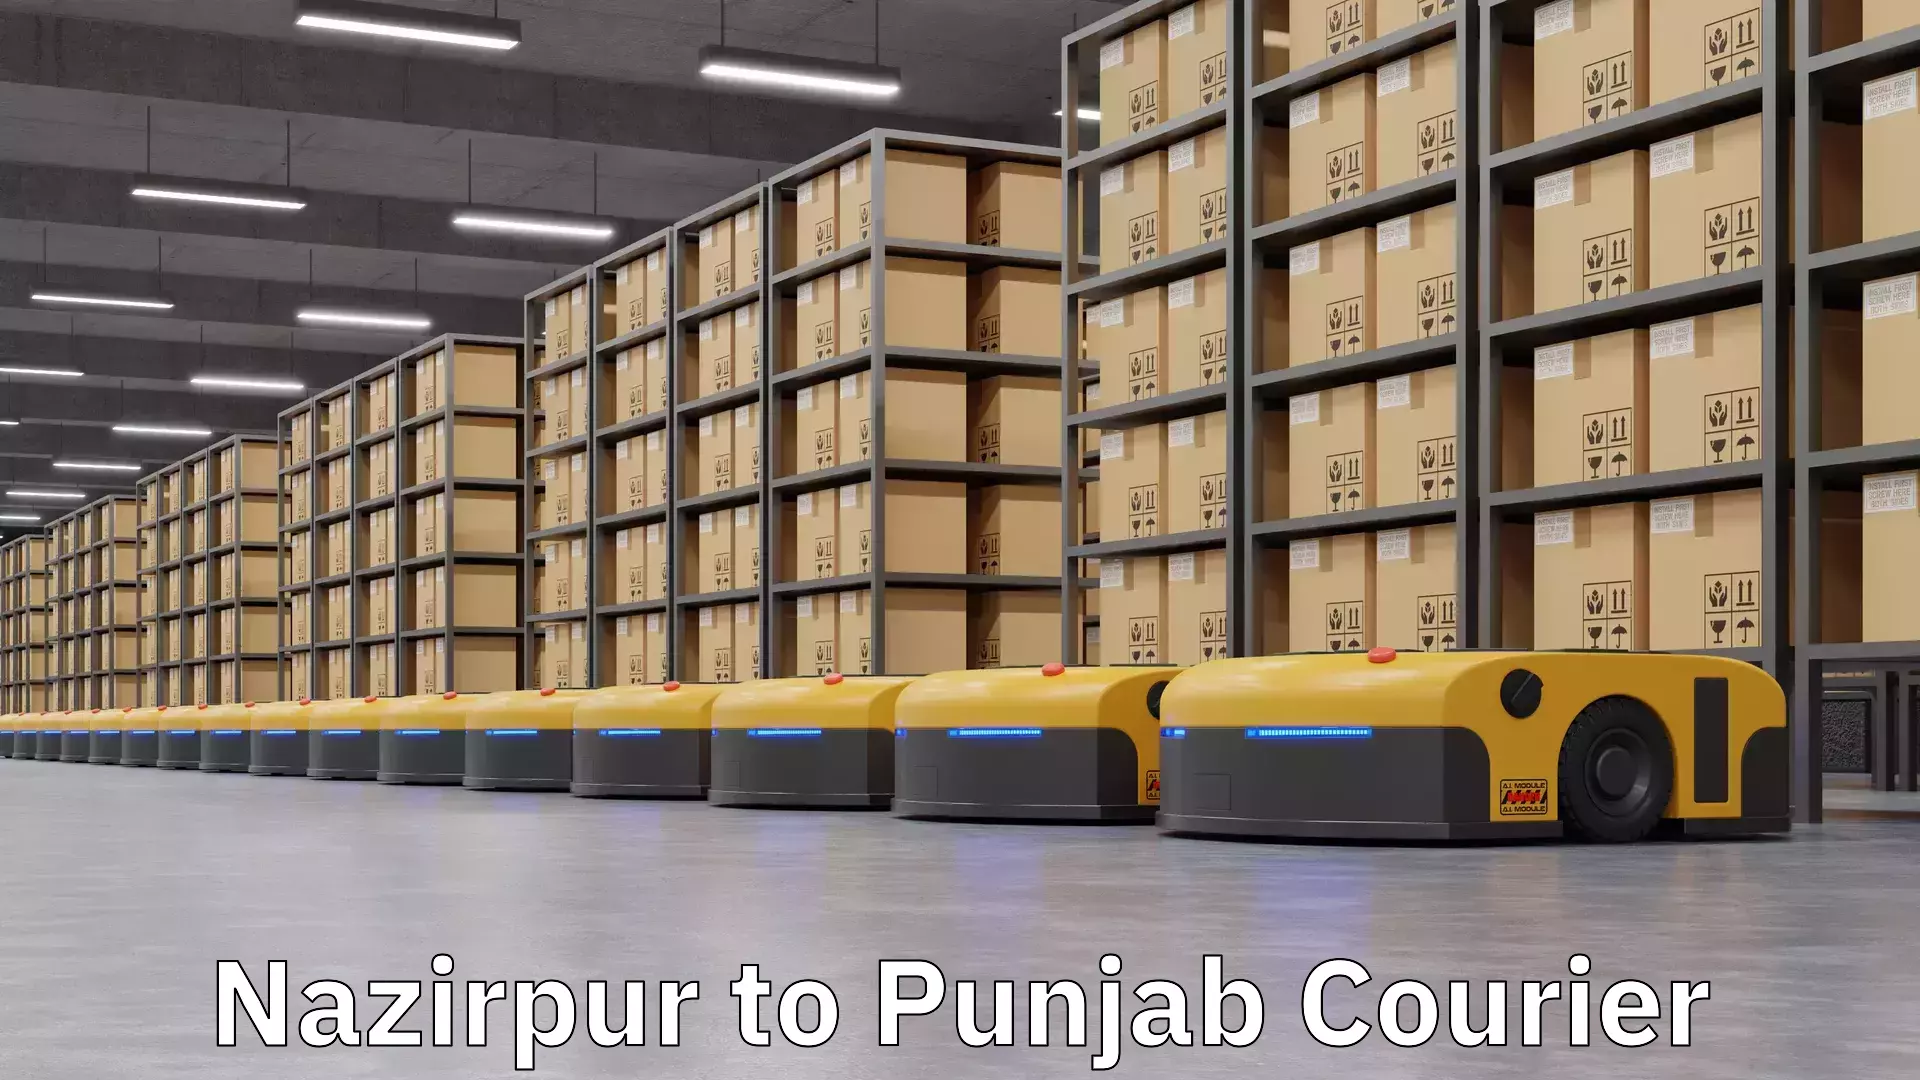 Heavy parcel delivery Nazirpur to Mohali